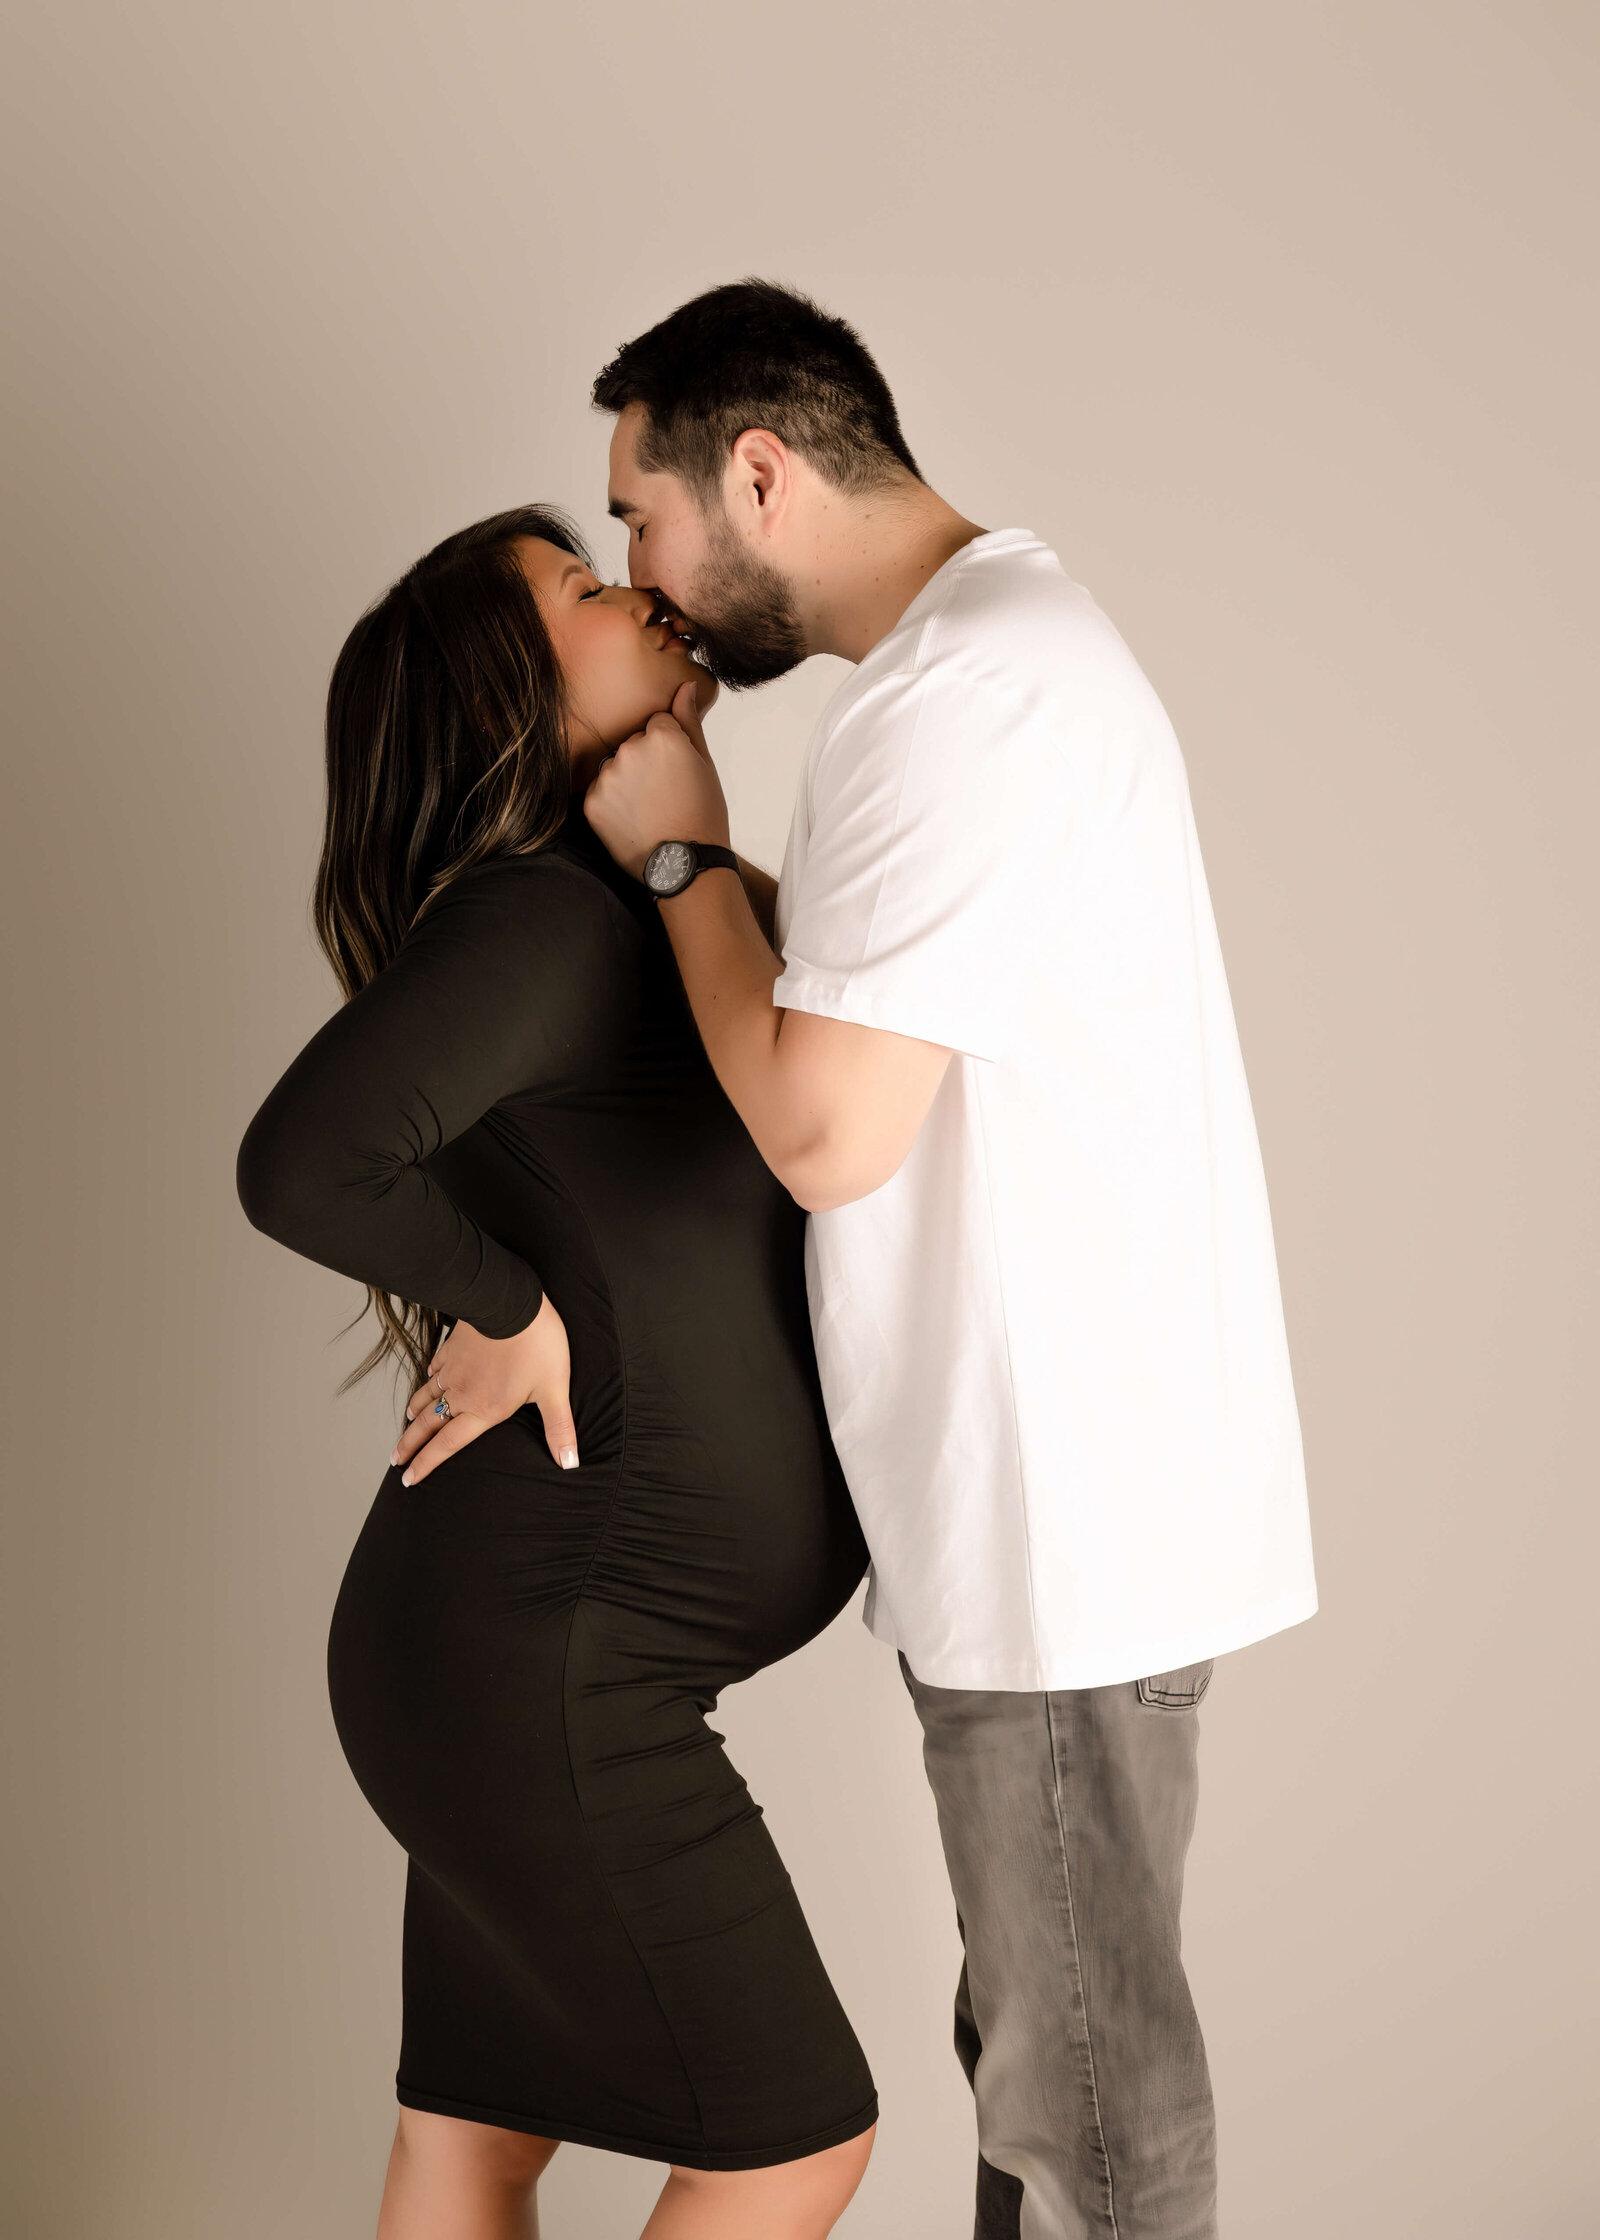 Husband giving wife a kiss while holding her chin in studio maternity session by Ashley Nicole.